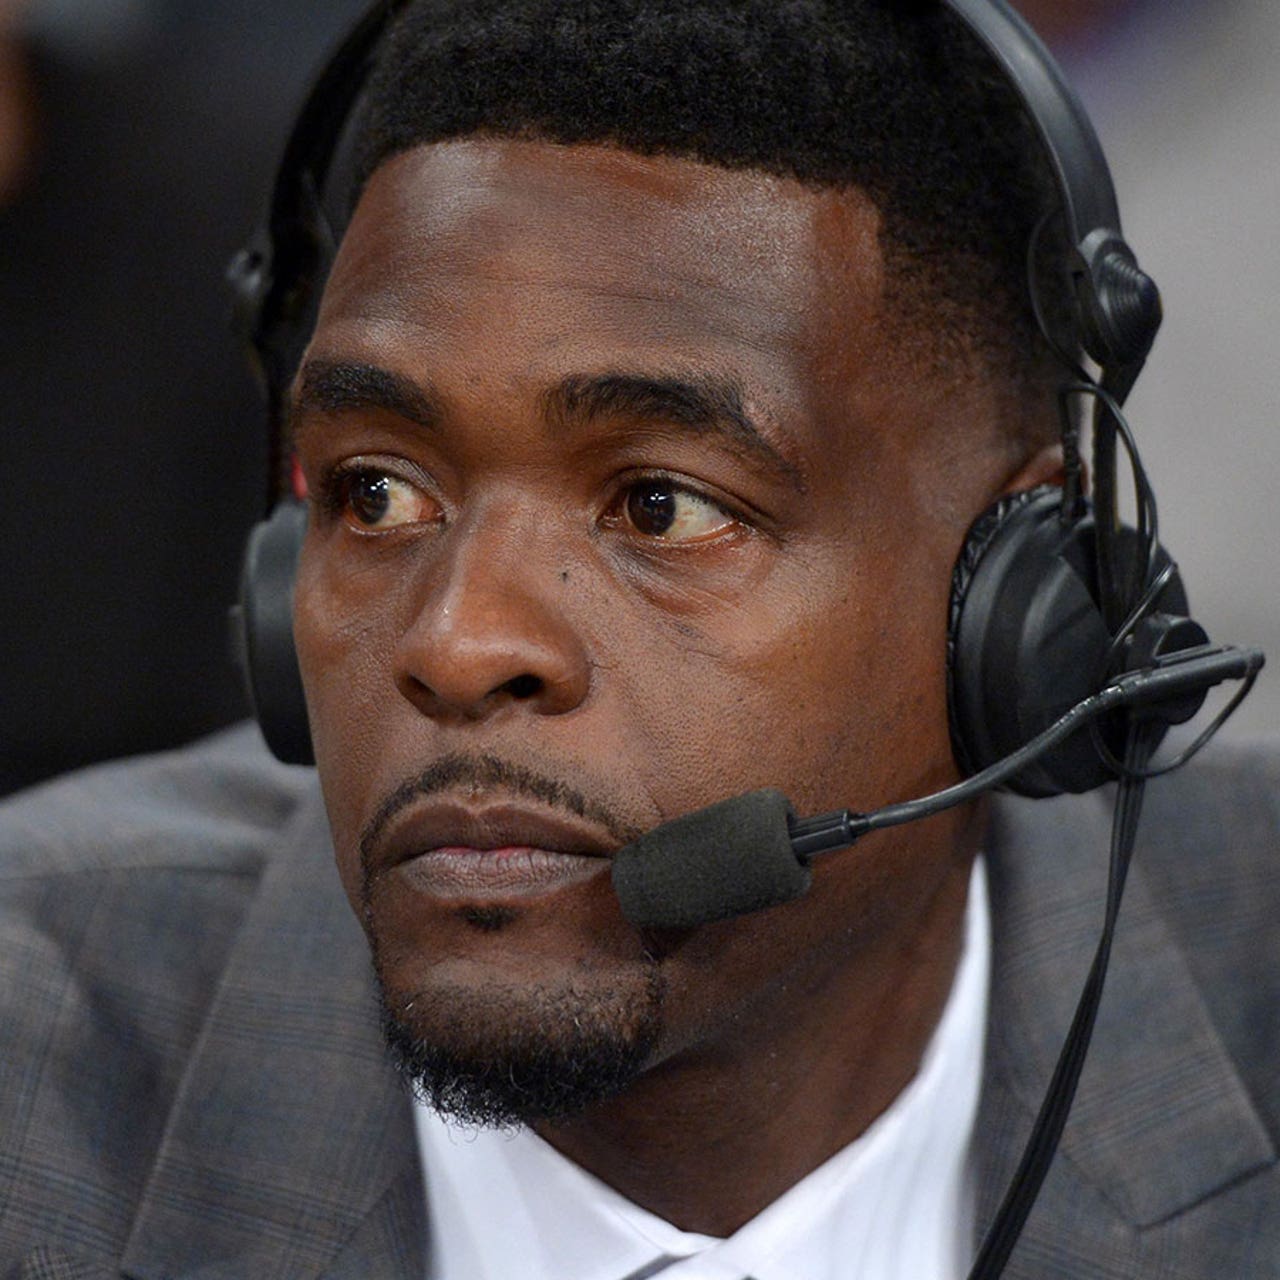 Jalen Rose in touch with Chris Webber to end well-publicized feud